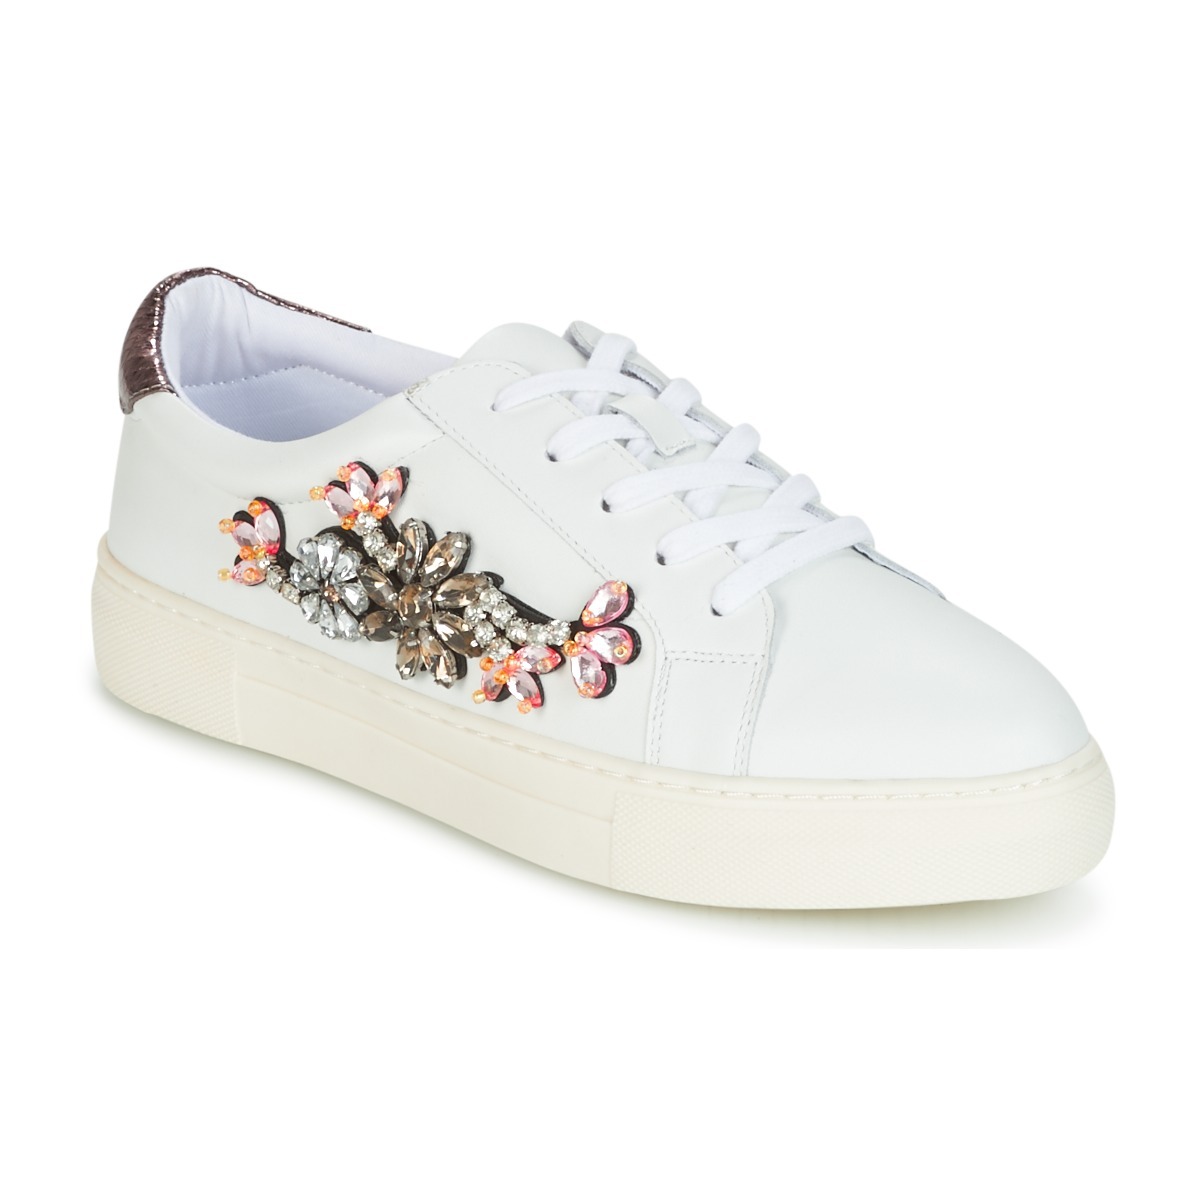 Dune London Woman Sneakers White from Spartoo GOOFASH